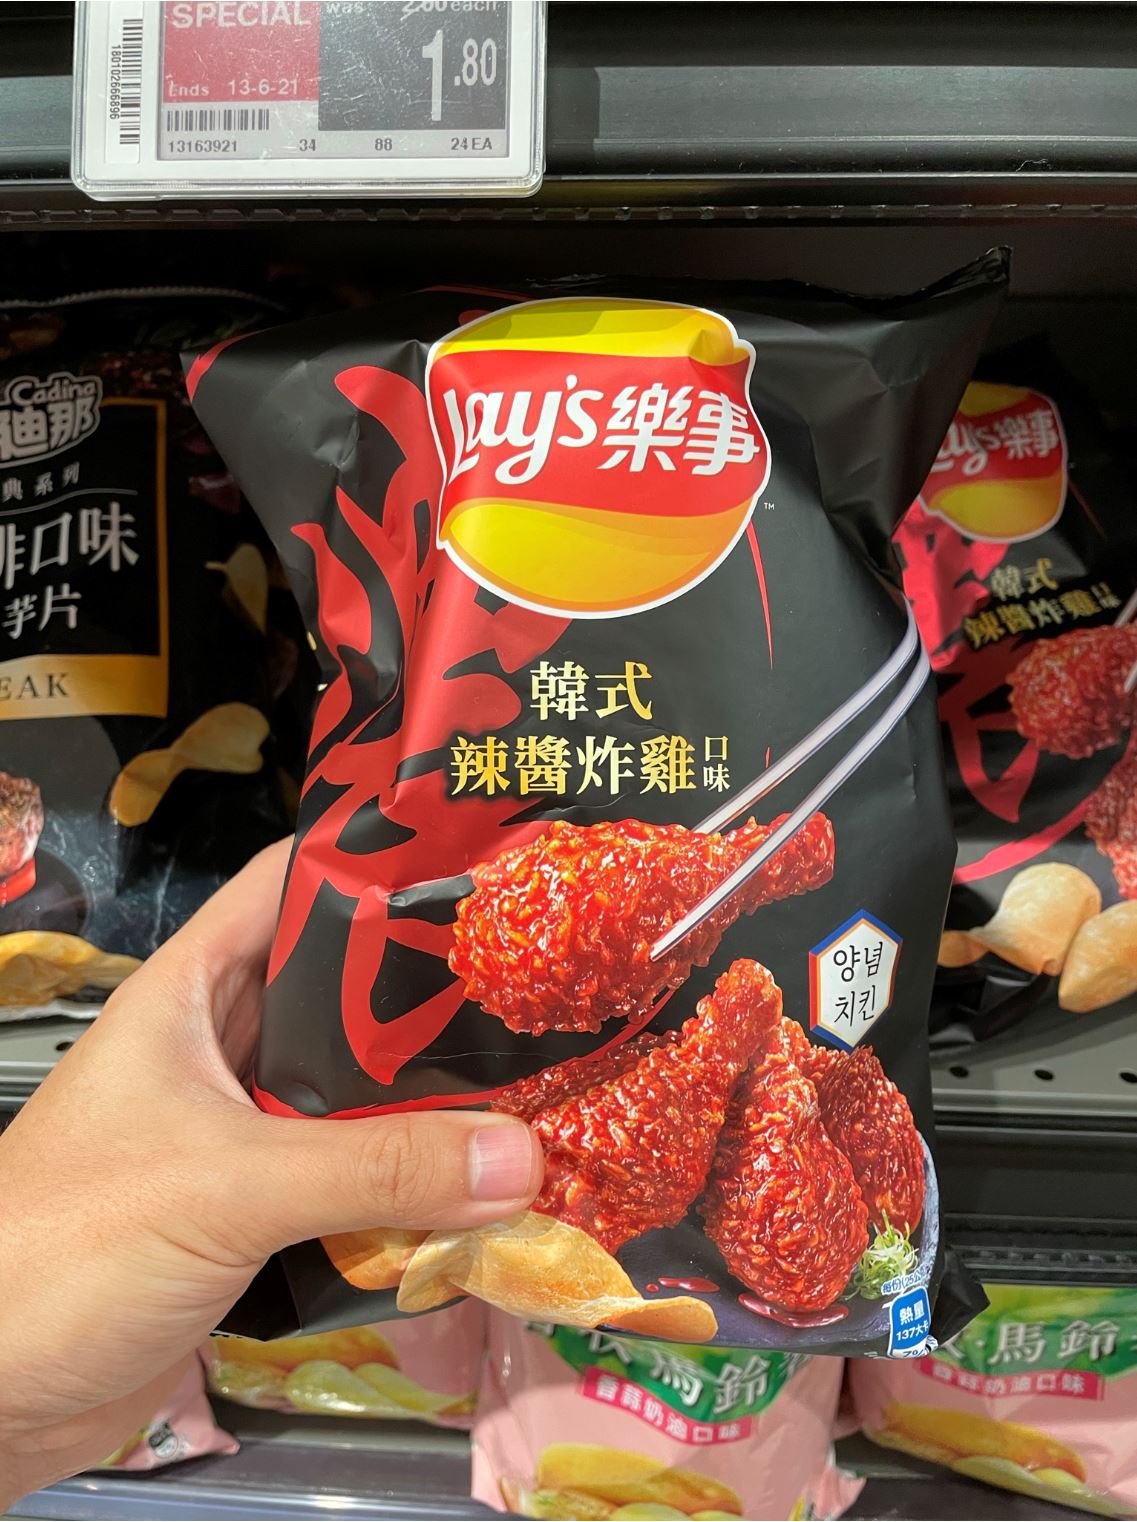 Lay’s Korean Spicy Chicken Potato Chips Now Available For $3.80 - 1